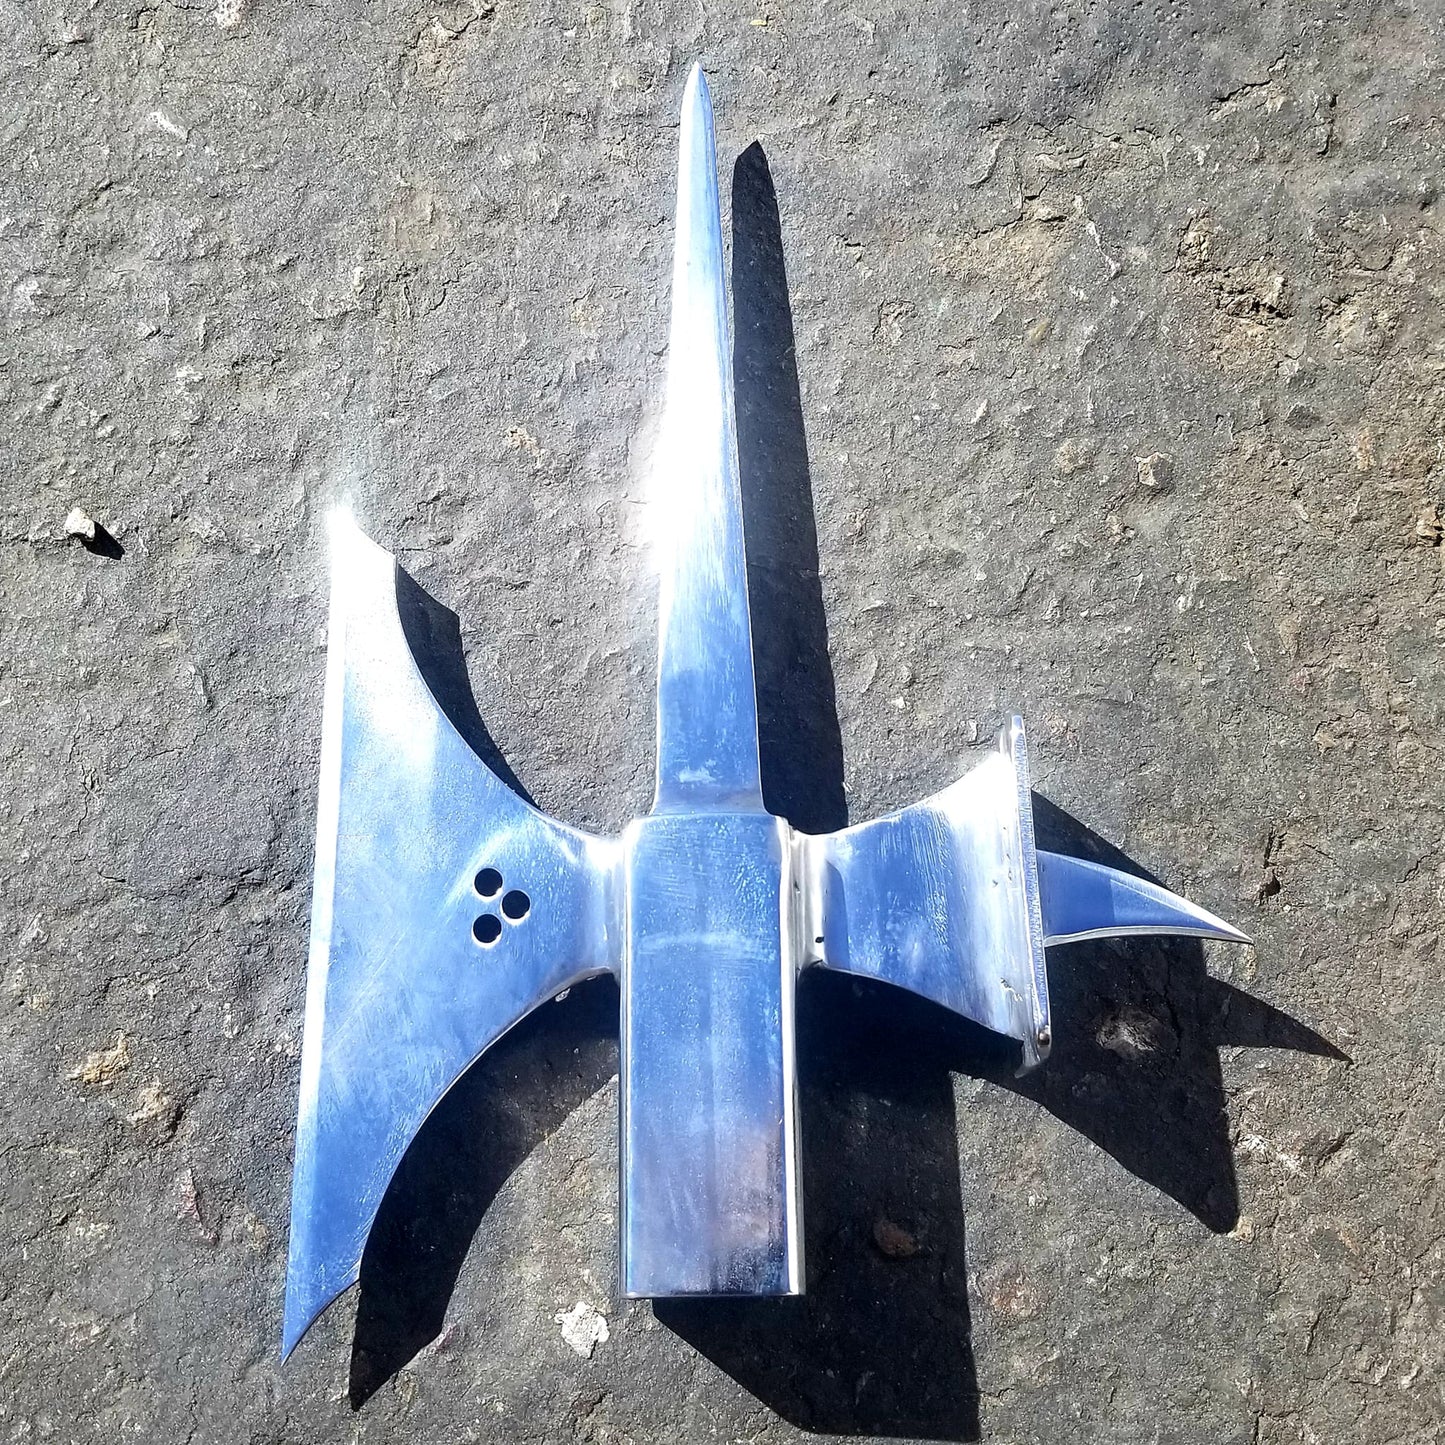 Poleaxe 410 Sping blades (Tips are Pointy but blades Not Sharp)